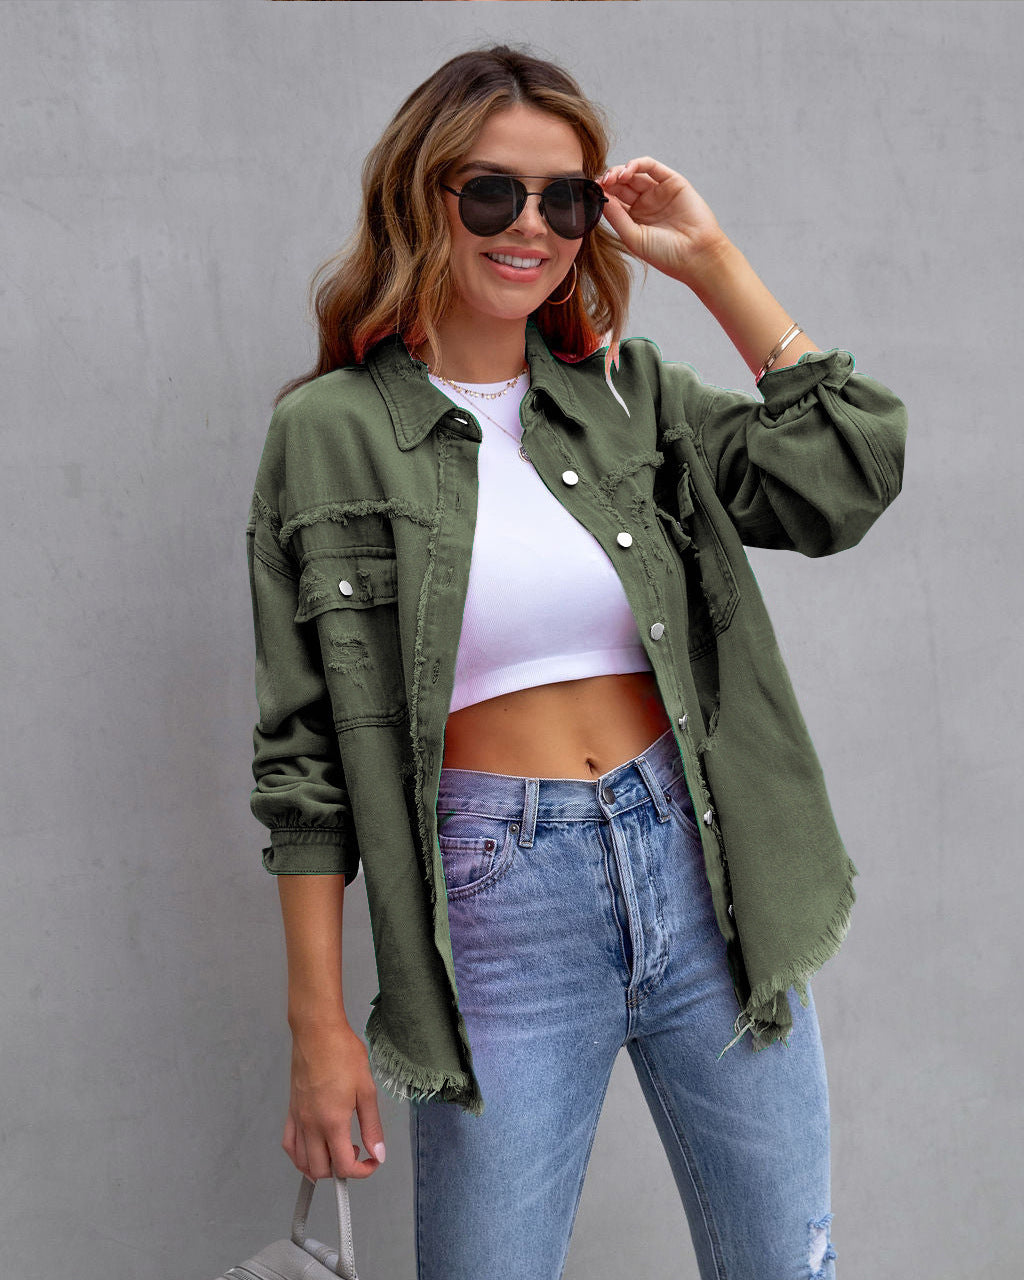 Fashion Ripped Shirt Jacket Female Autumn And Spring Casual Tops